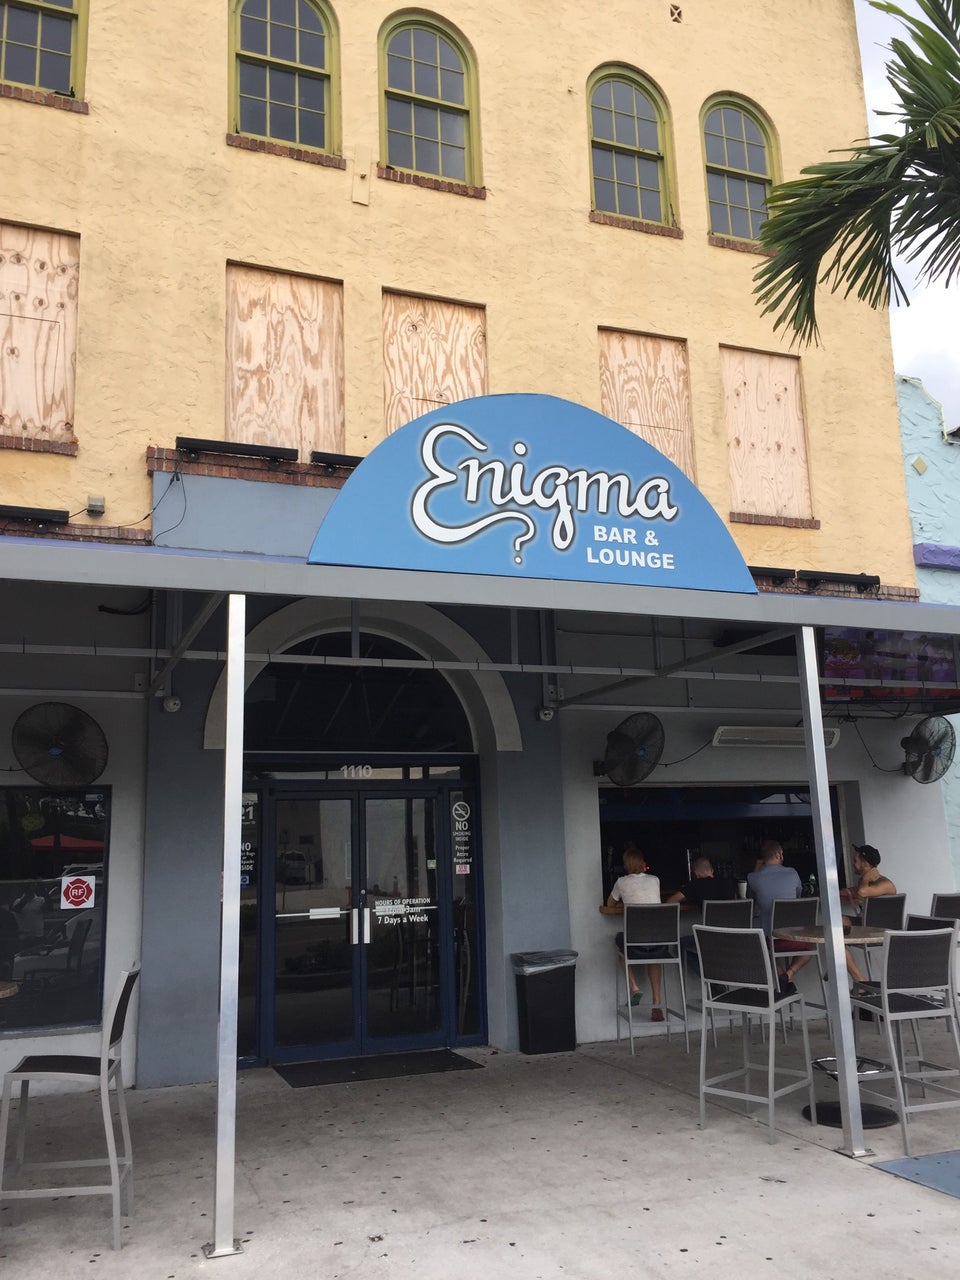 Enigma Restaurant and Lounge